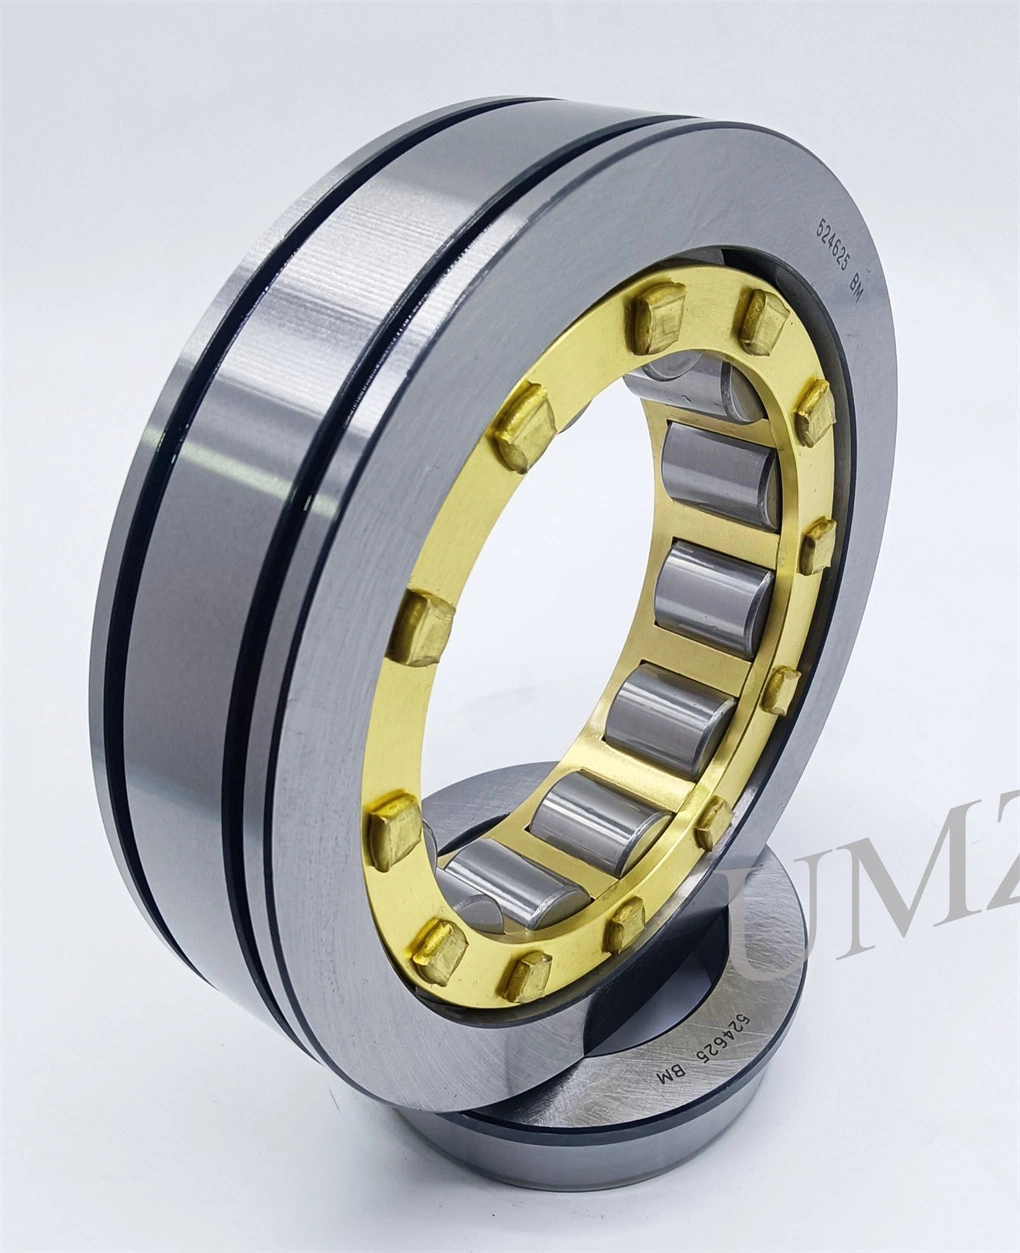 1688 Gearbox Bearing 524625 539090m 512533 Nupk310nr Nup314mn 5666616 524213 Automotive Auto Cylindrical Roller Rolling Bearing Rodamientos Rolamentos